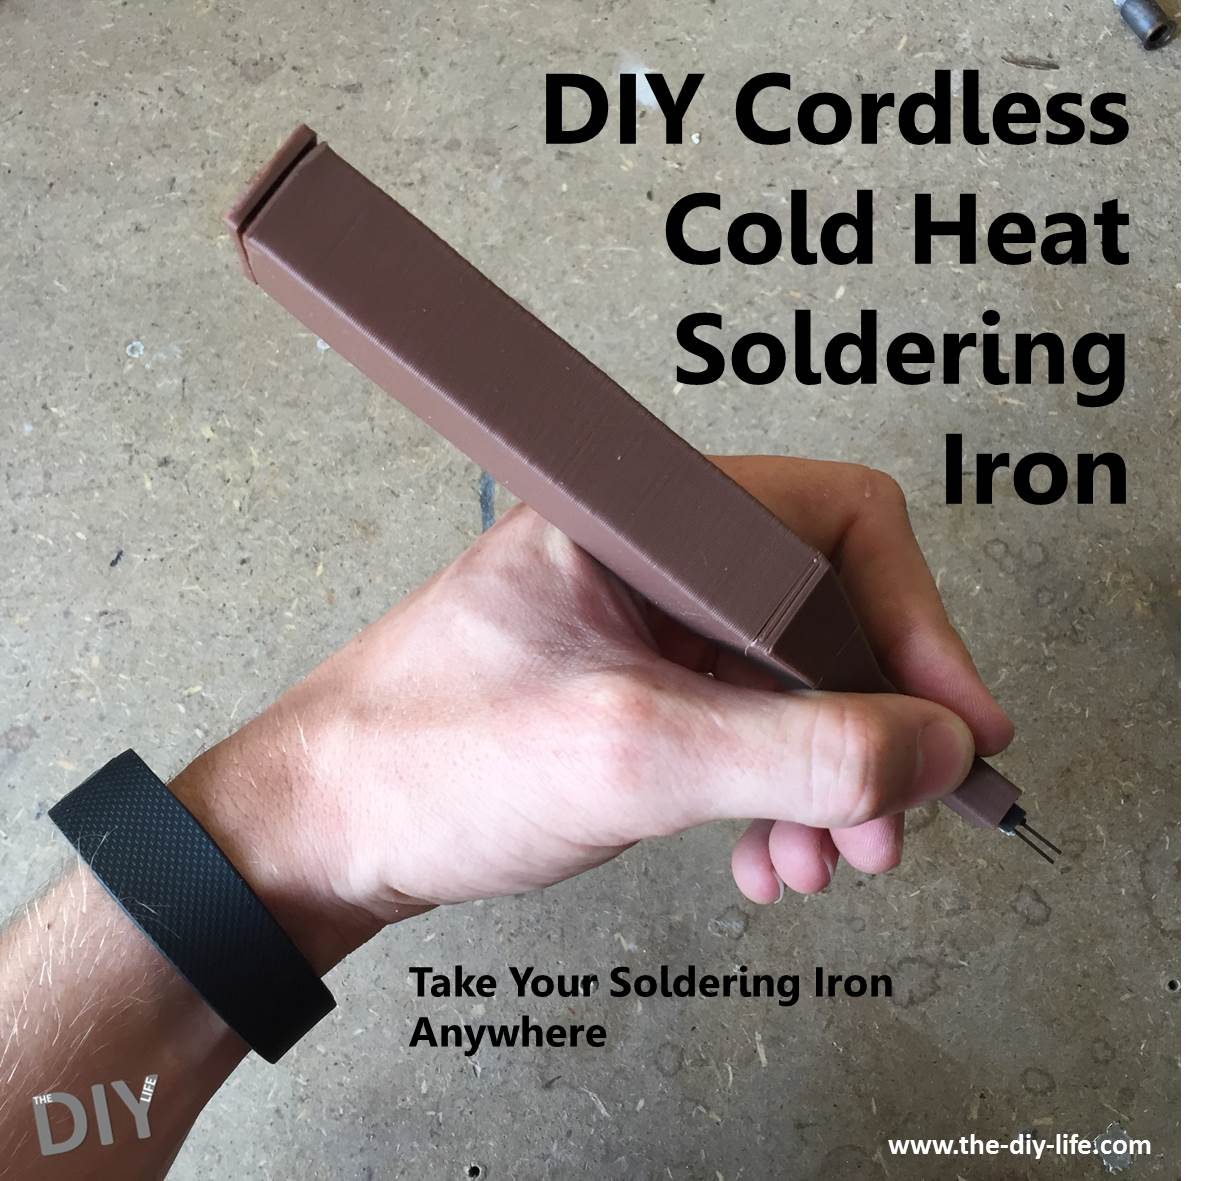 Step by step guide - DIY cordless cold heat soldering iron